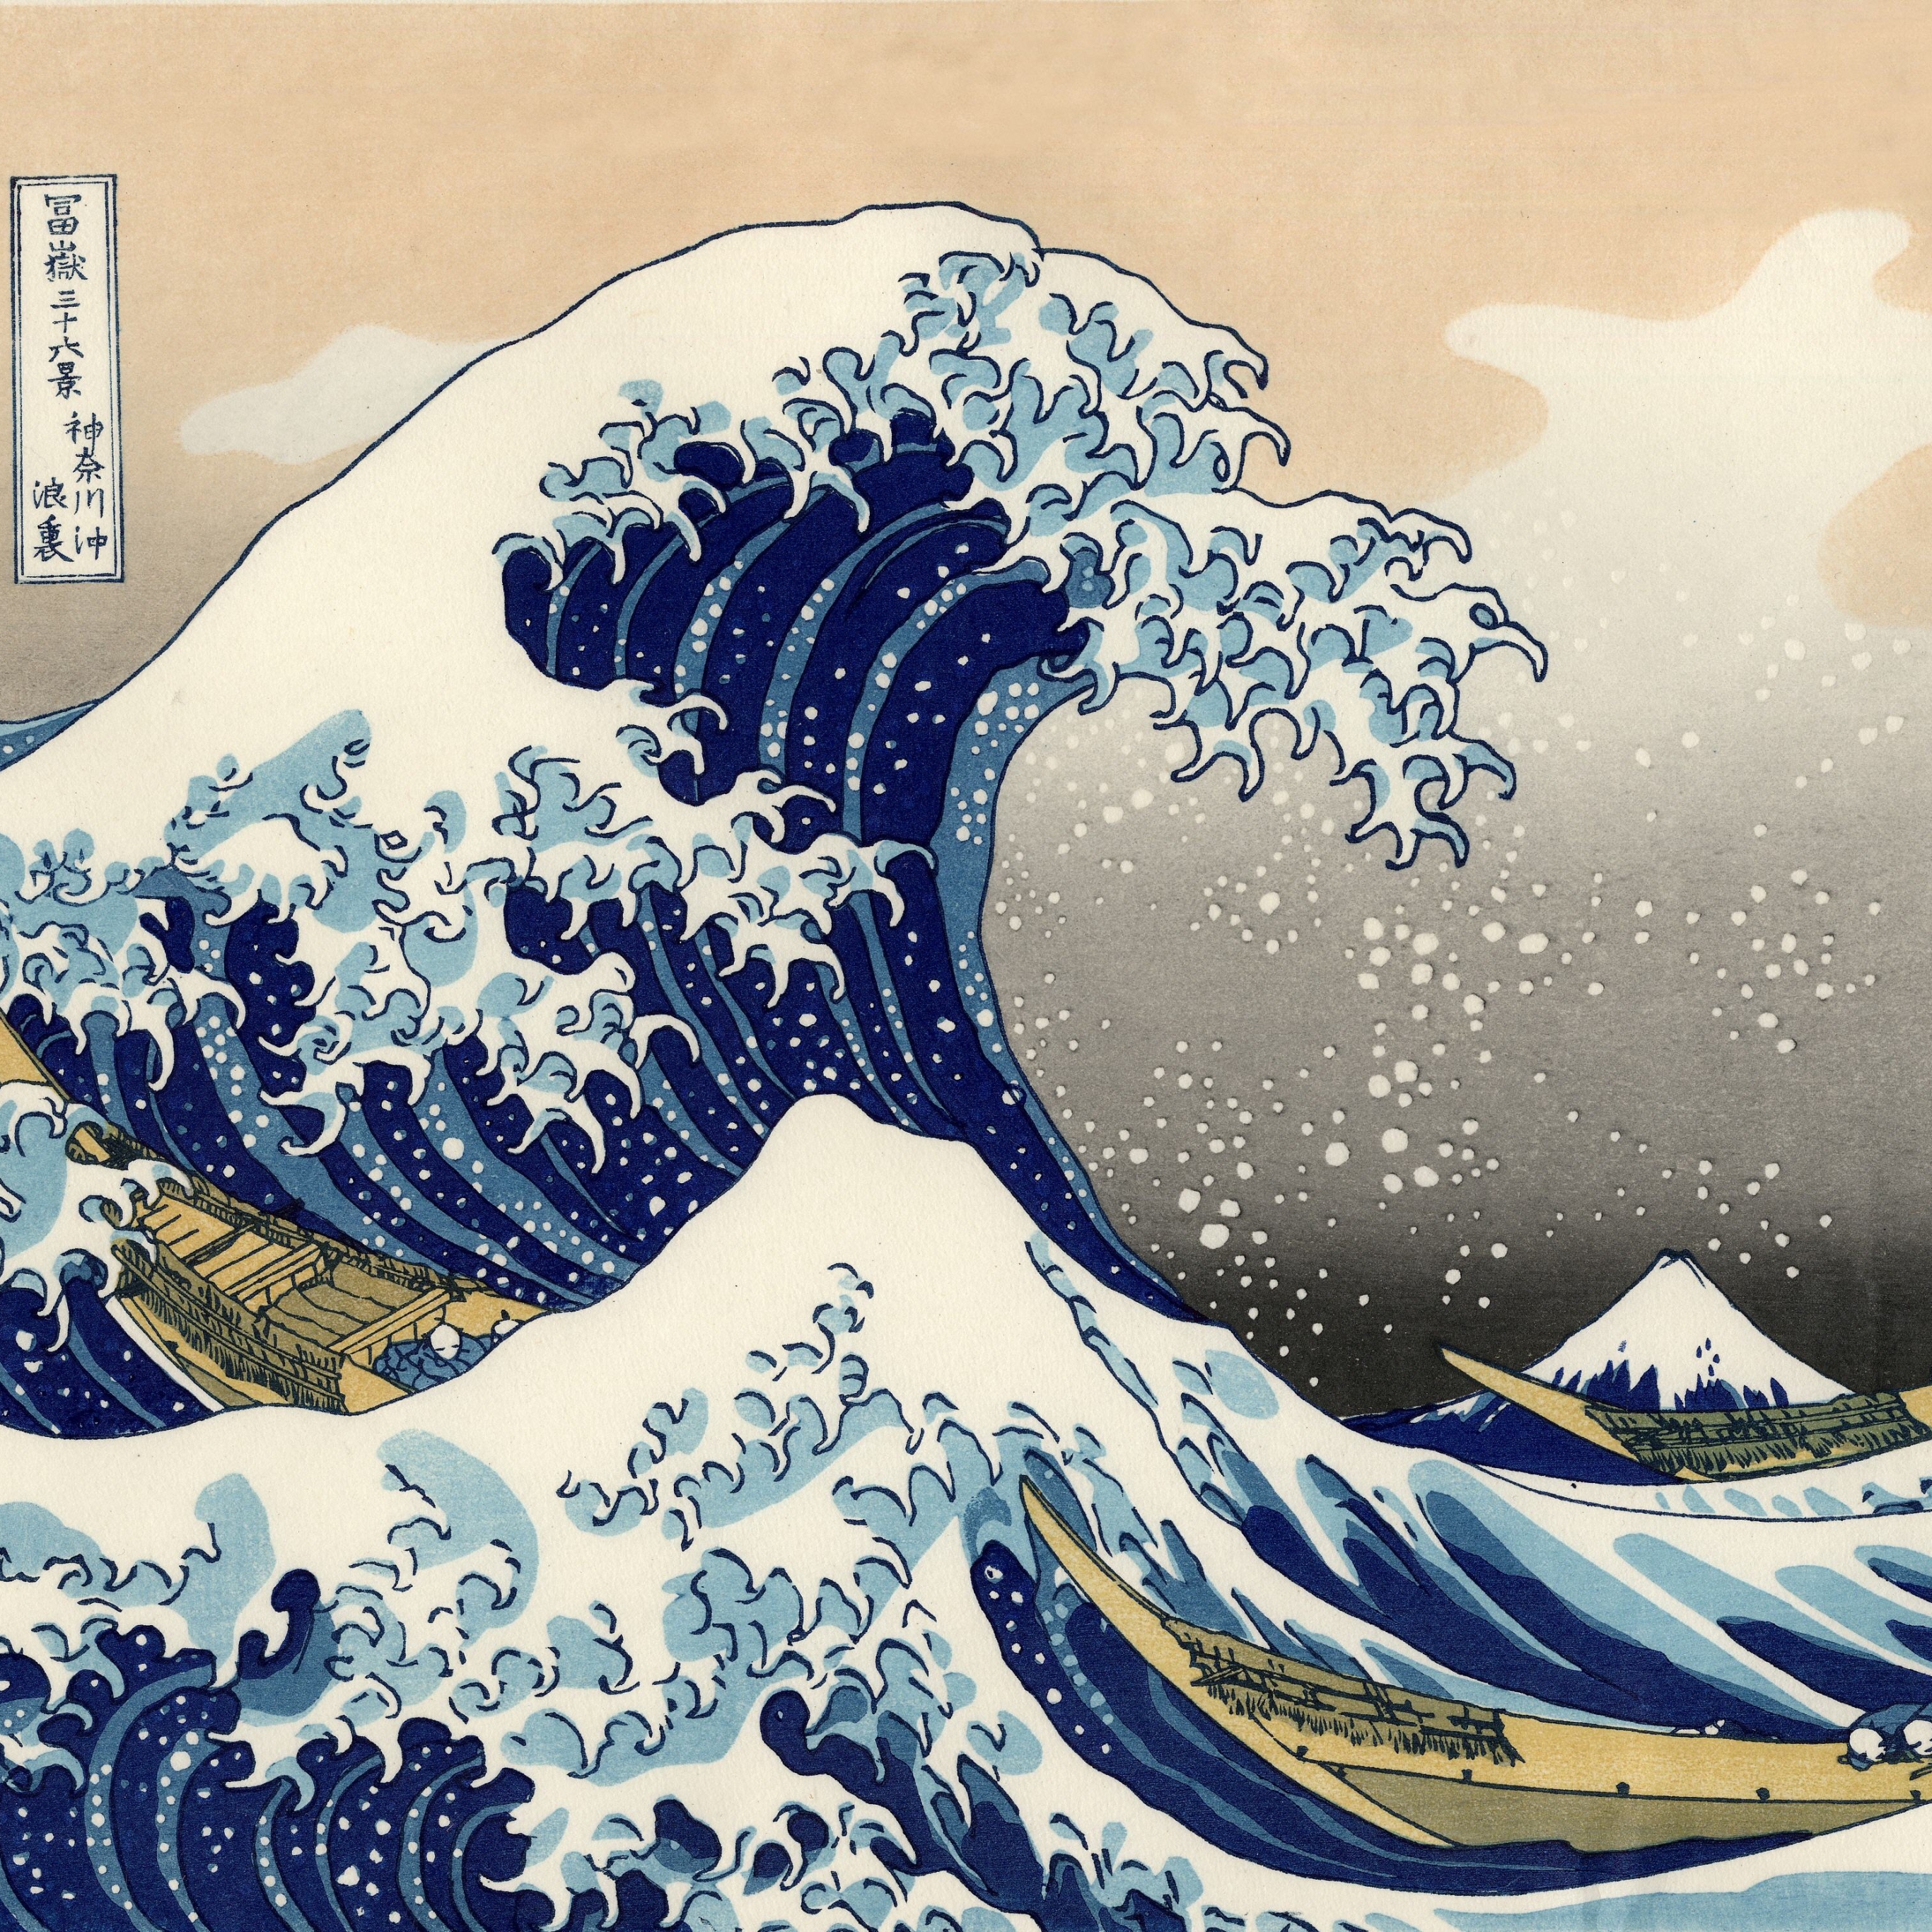 the great wave off kanagawa, artistic, wave High Definition image